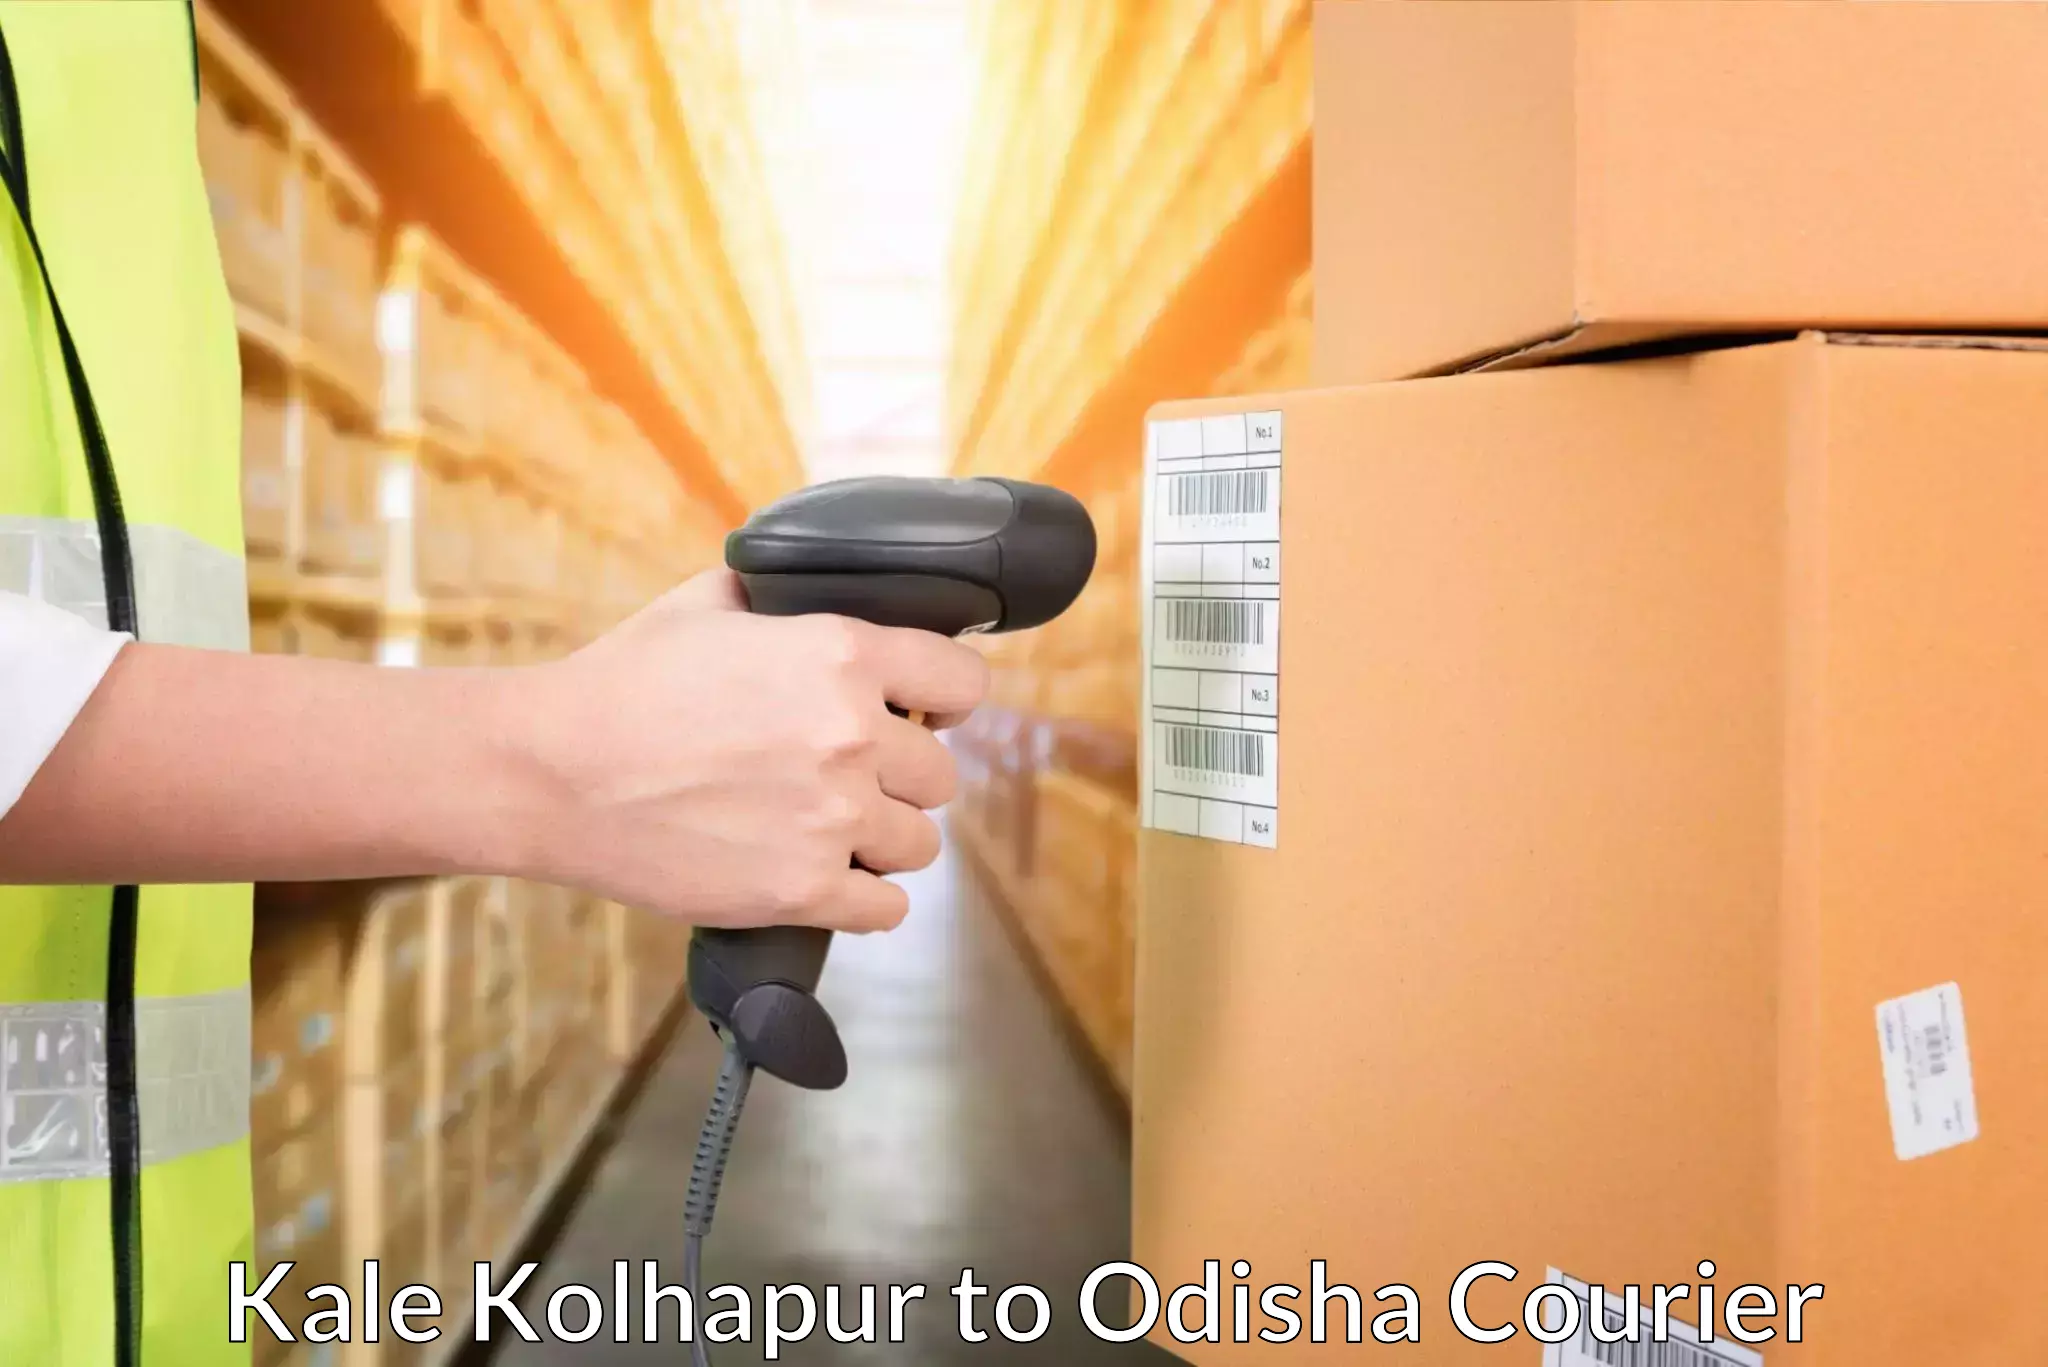 Efficient package consolidation Kale Kolhapur to Nayagarh